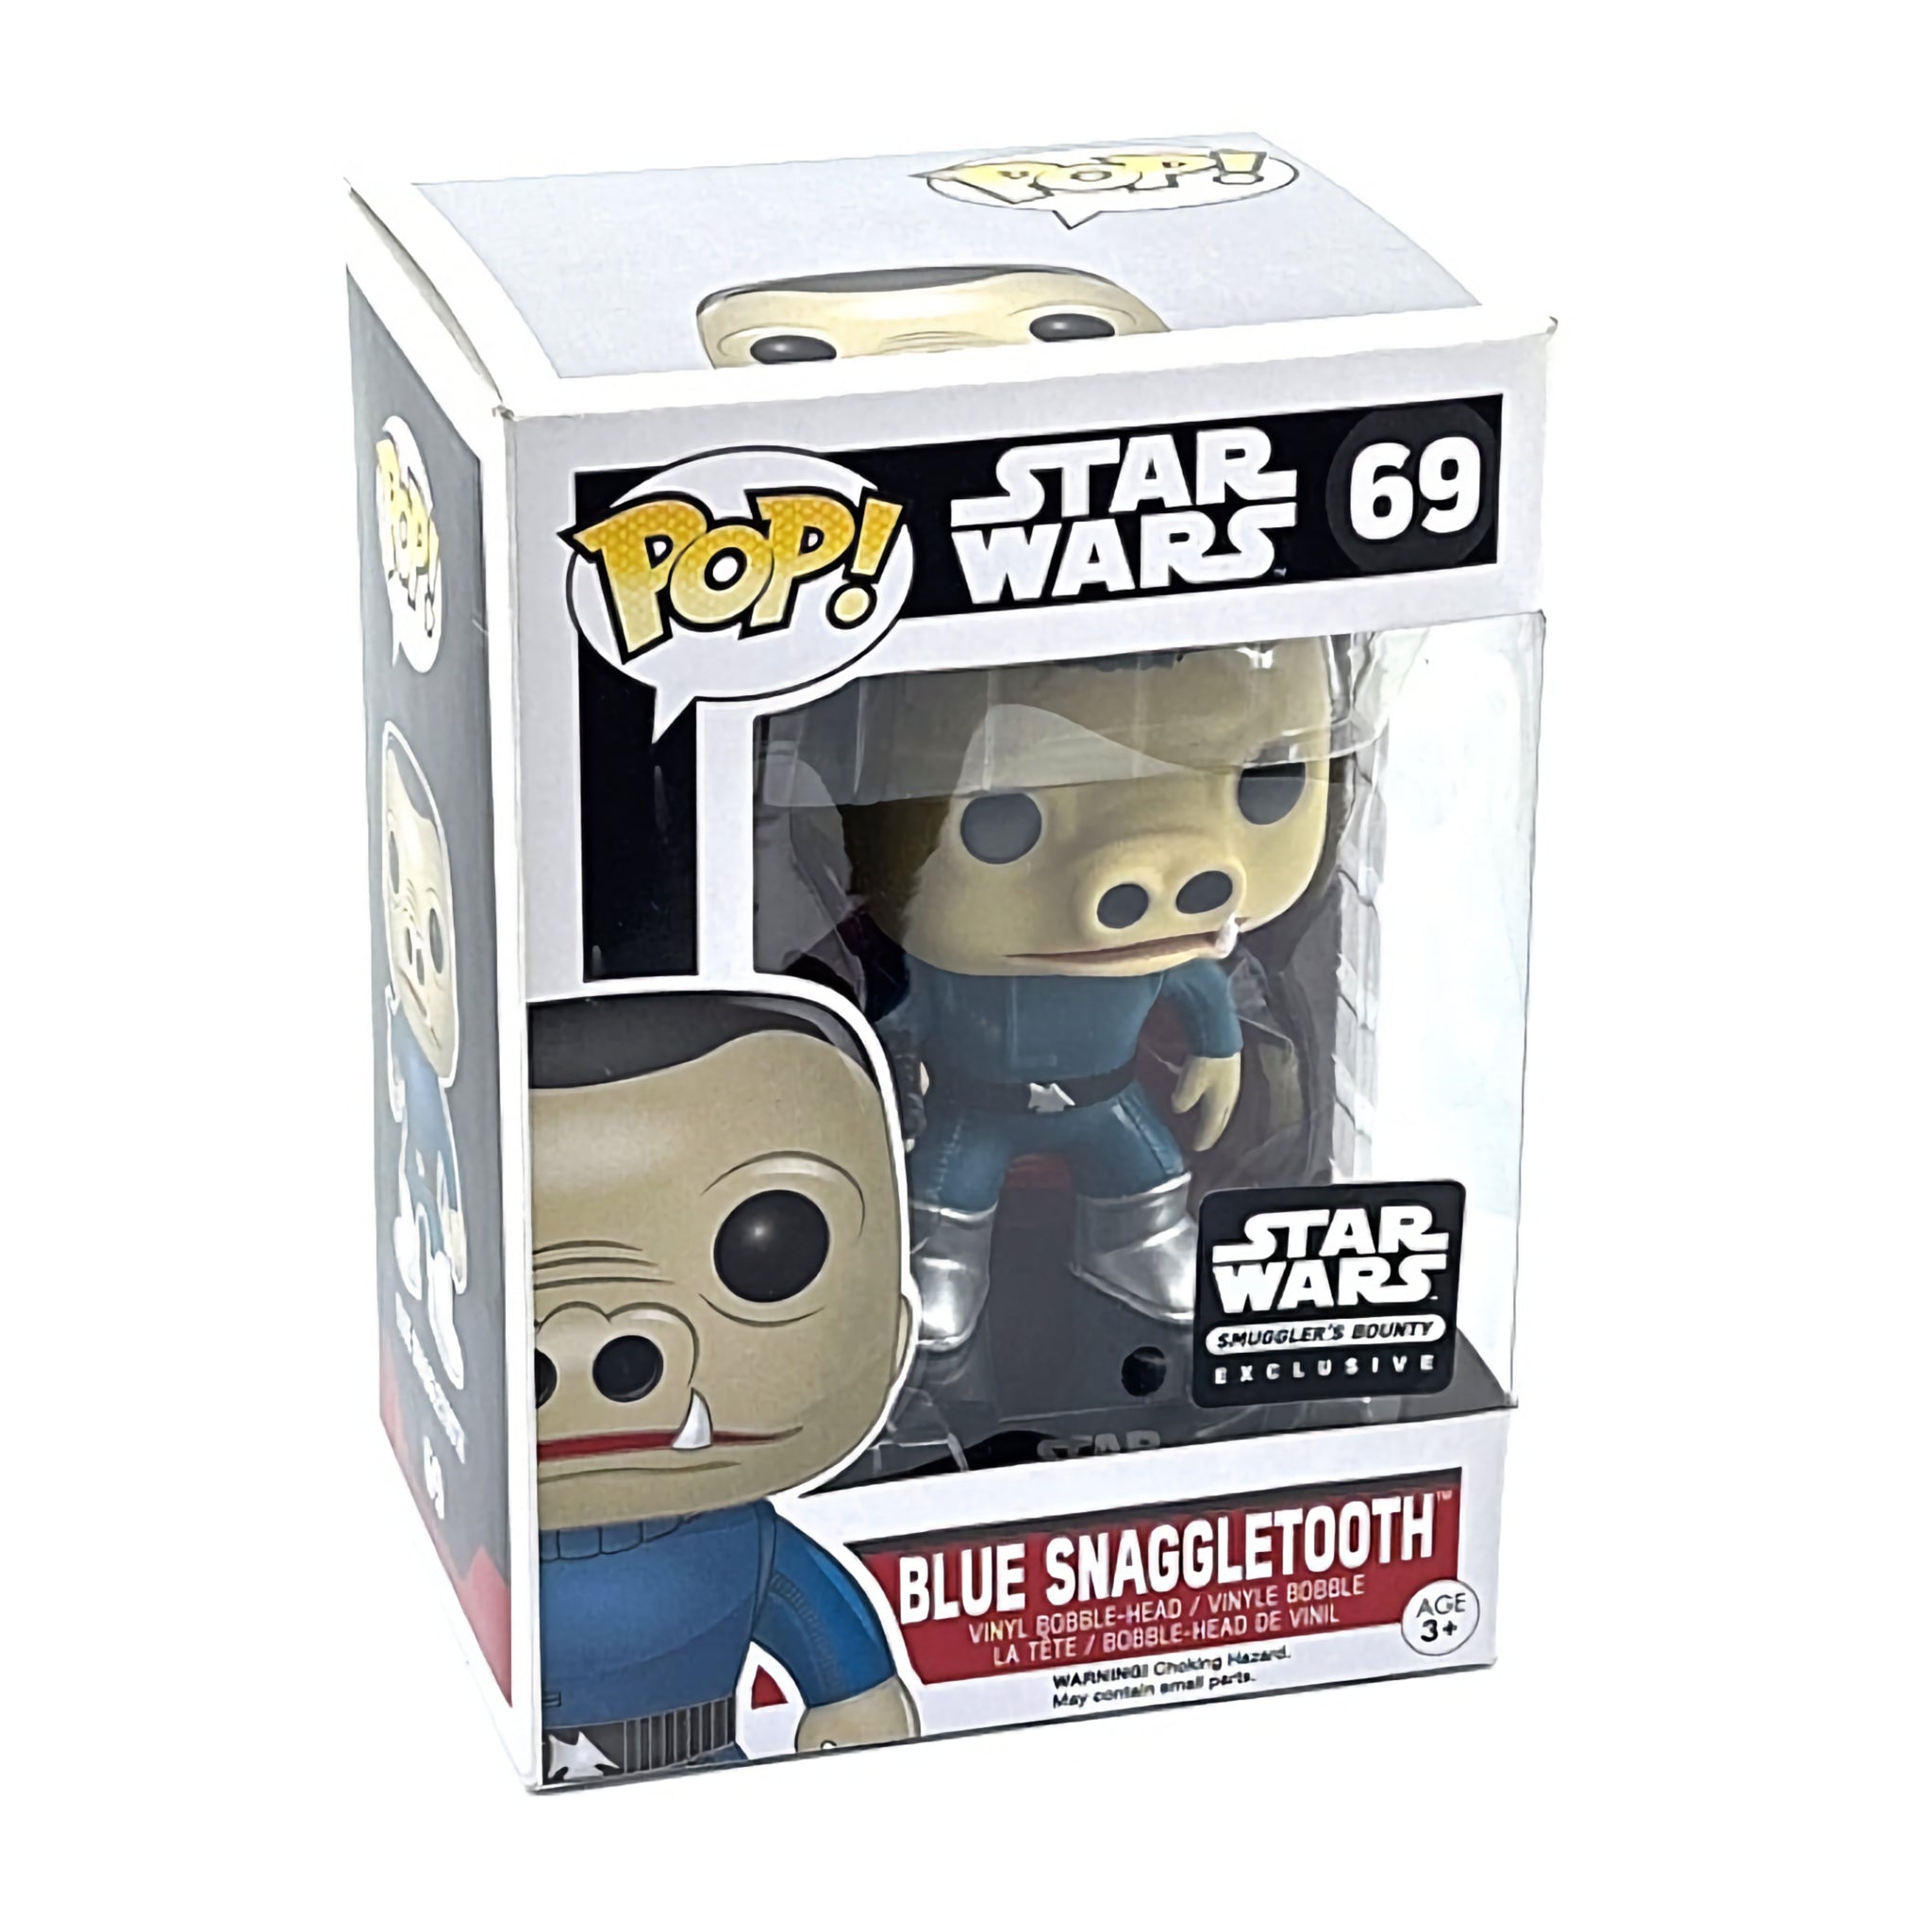 Blue Snaggletooth Funko Pop! SMUGGLER'S BOUNTY EXCLUSIVE